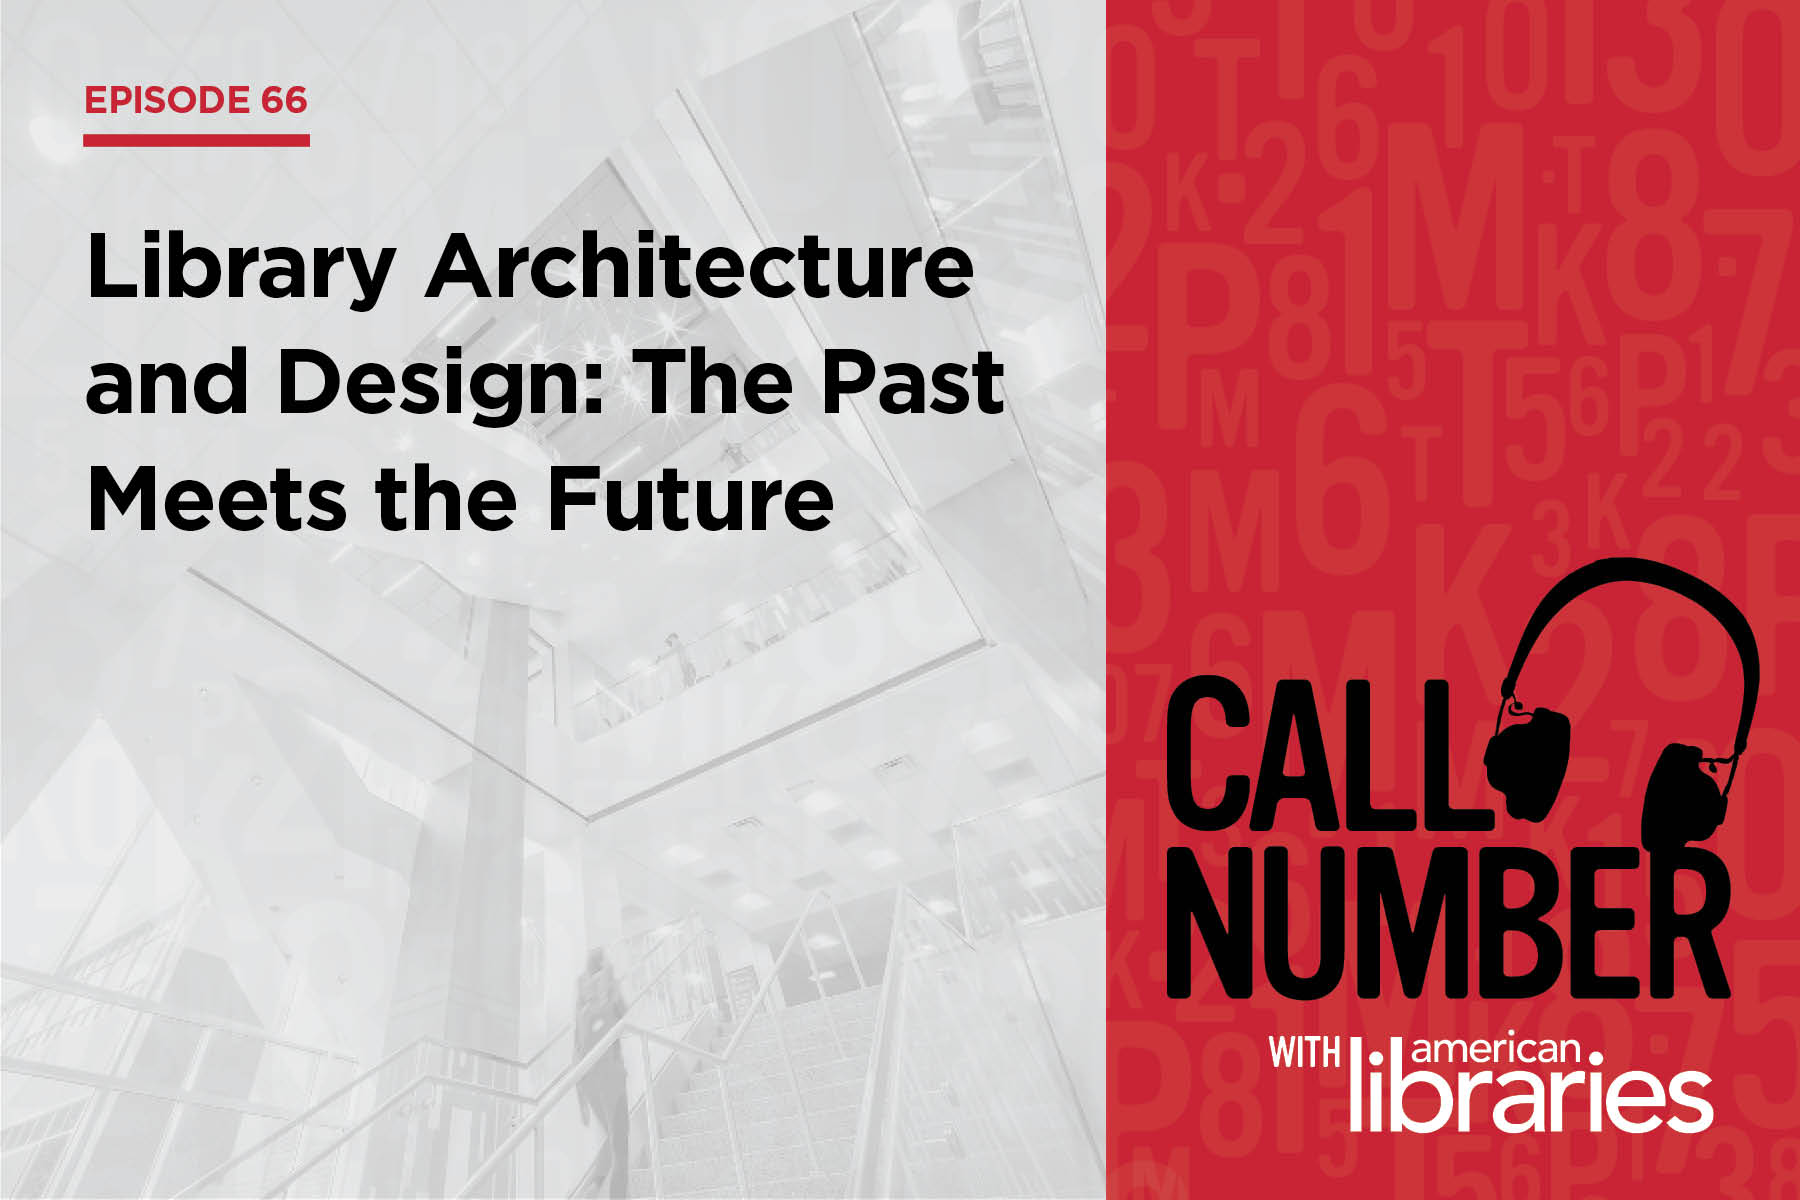 Call Number with American Libraries, Episode 66 - Library Architecture and Design: The Past Meets the Future